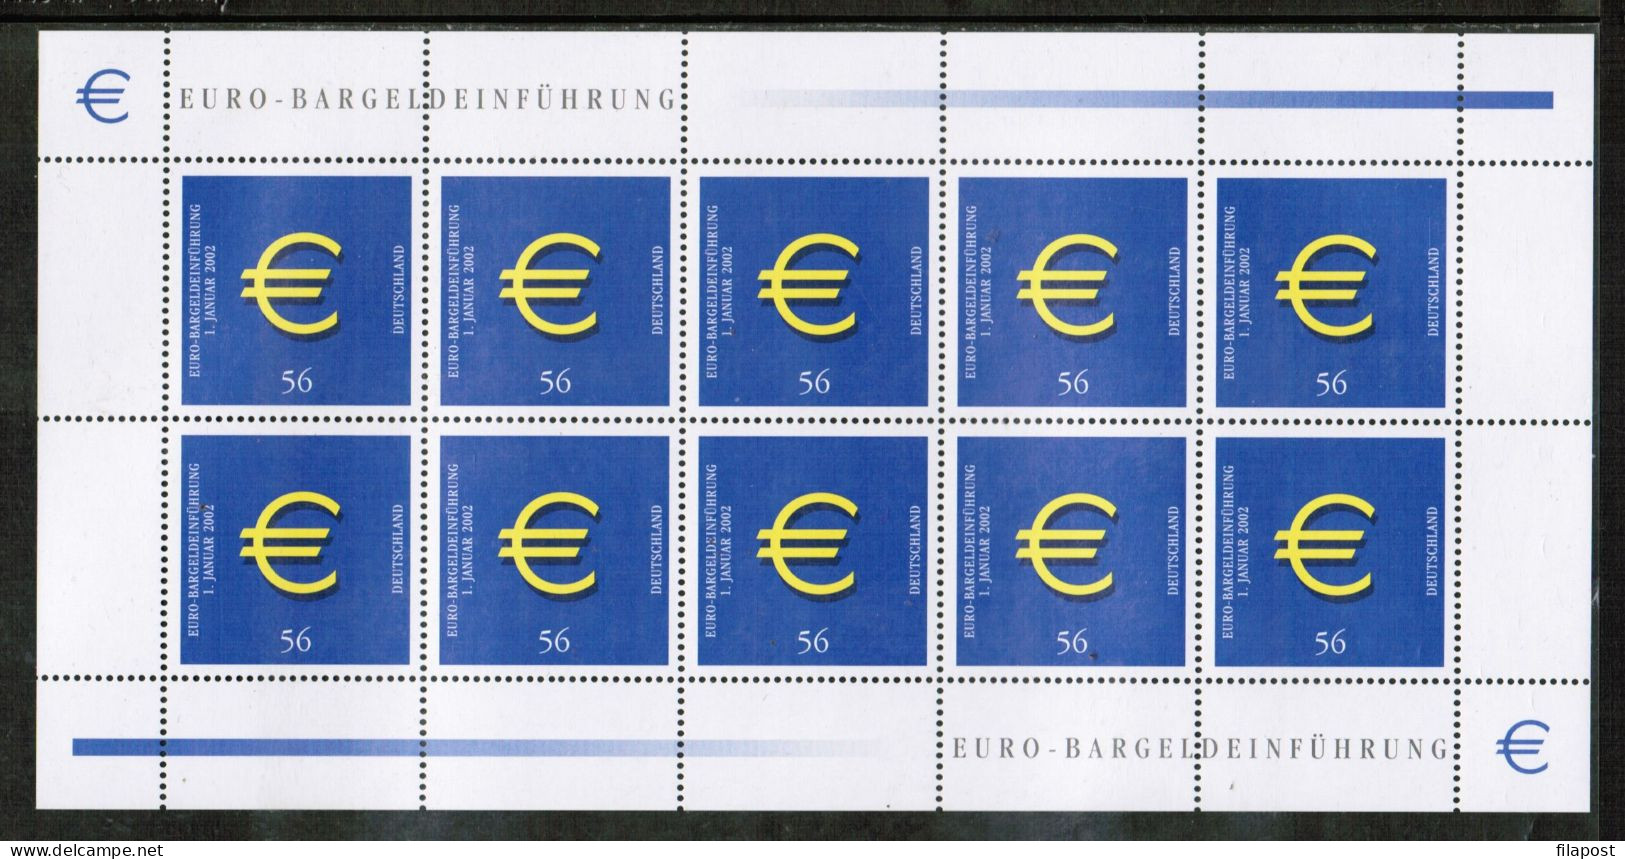 Germany 2002 / Michel 2234 Kb - 1 January 2002 Introduction Of Euro Cash - Sheet Of 10 Stamps MNH - Neufs